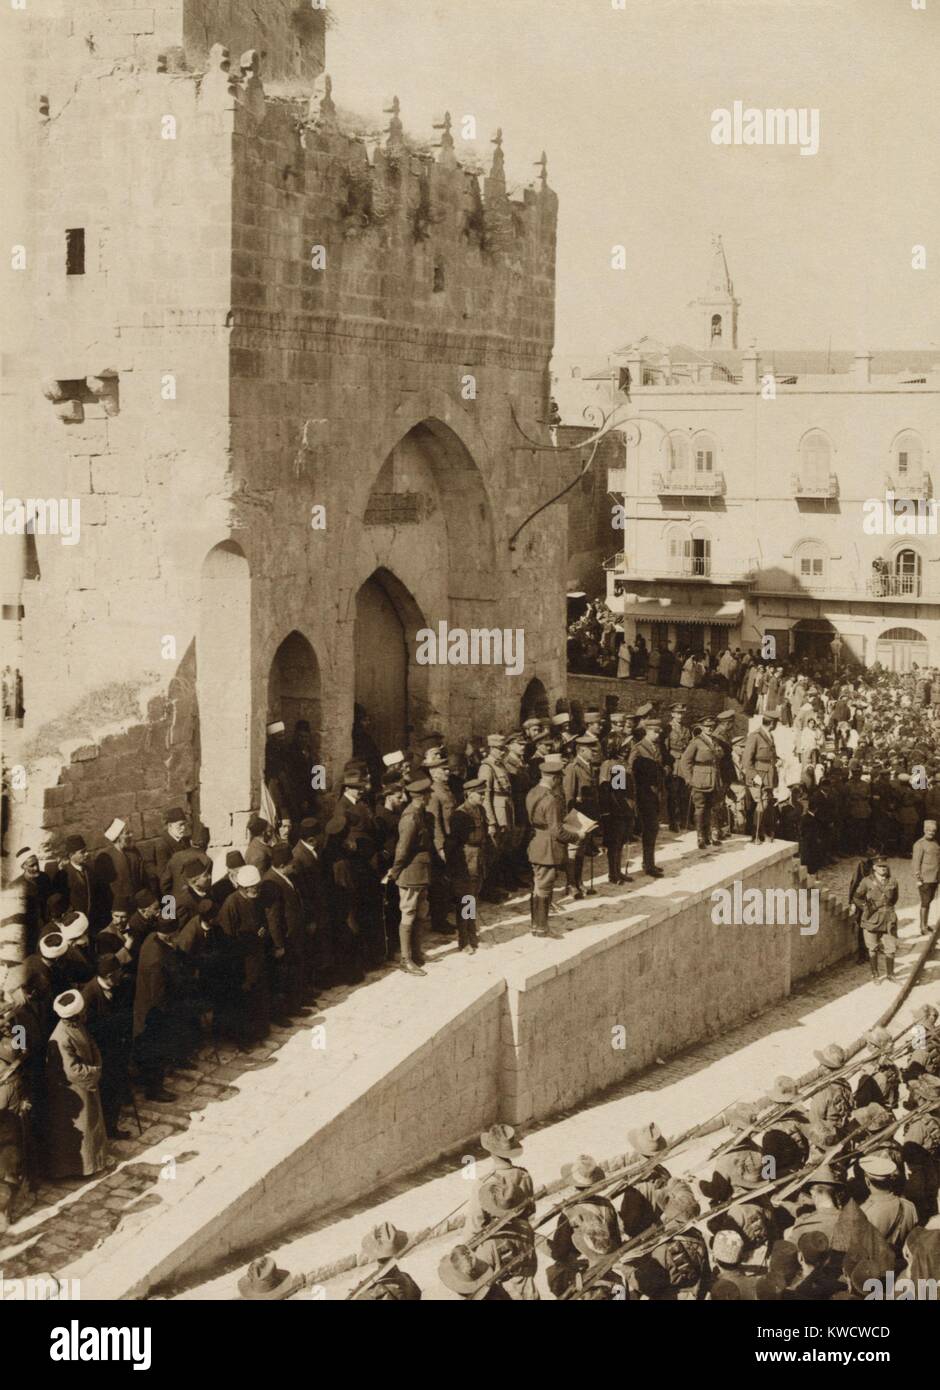 World War 1 in the Middle East. General Allenbys Proclamation of Martial Law in Jerusalem being read in English at the Tower of David in Jerusalem. Dec. 11, 1917 (BSLOC 2013 1 72) Stock Photo